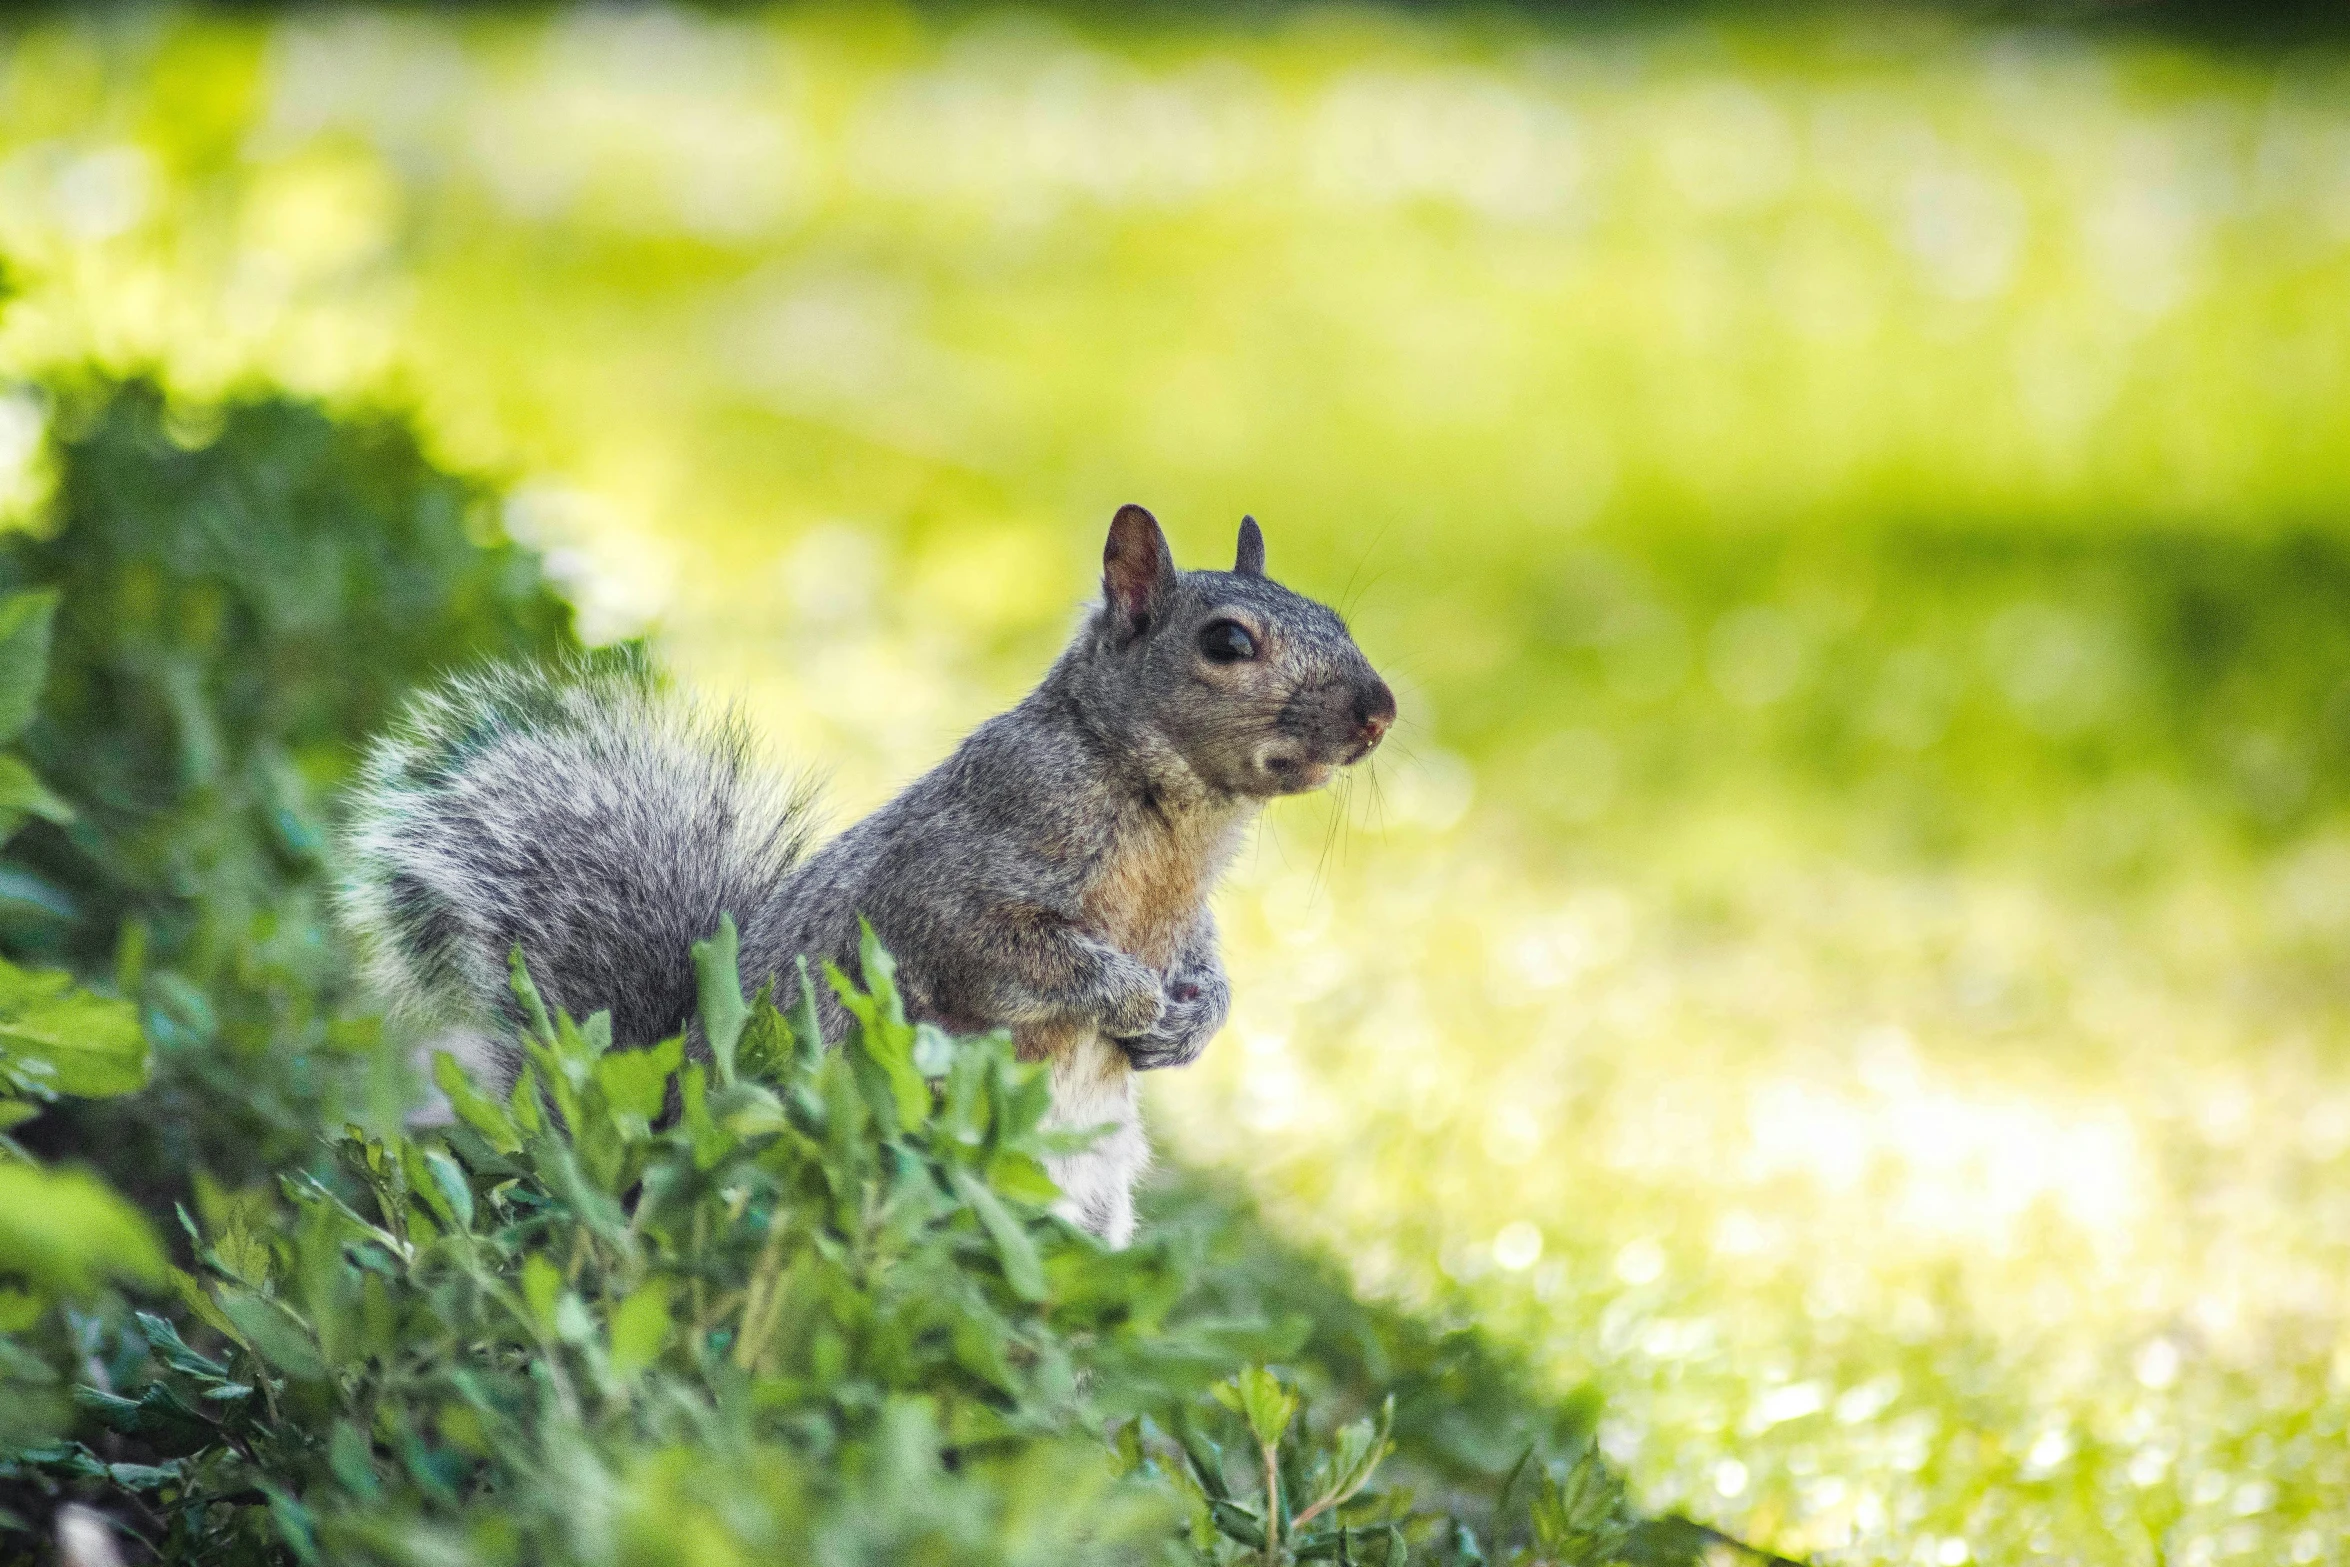 a squirrel stands in the grass and looks into the camera lens